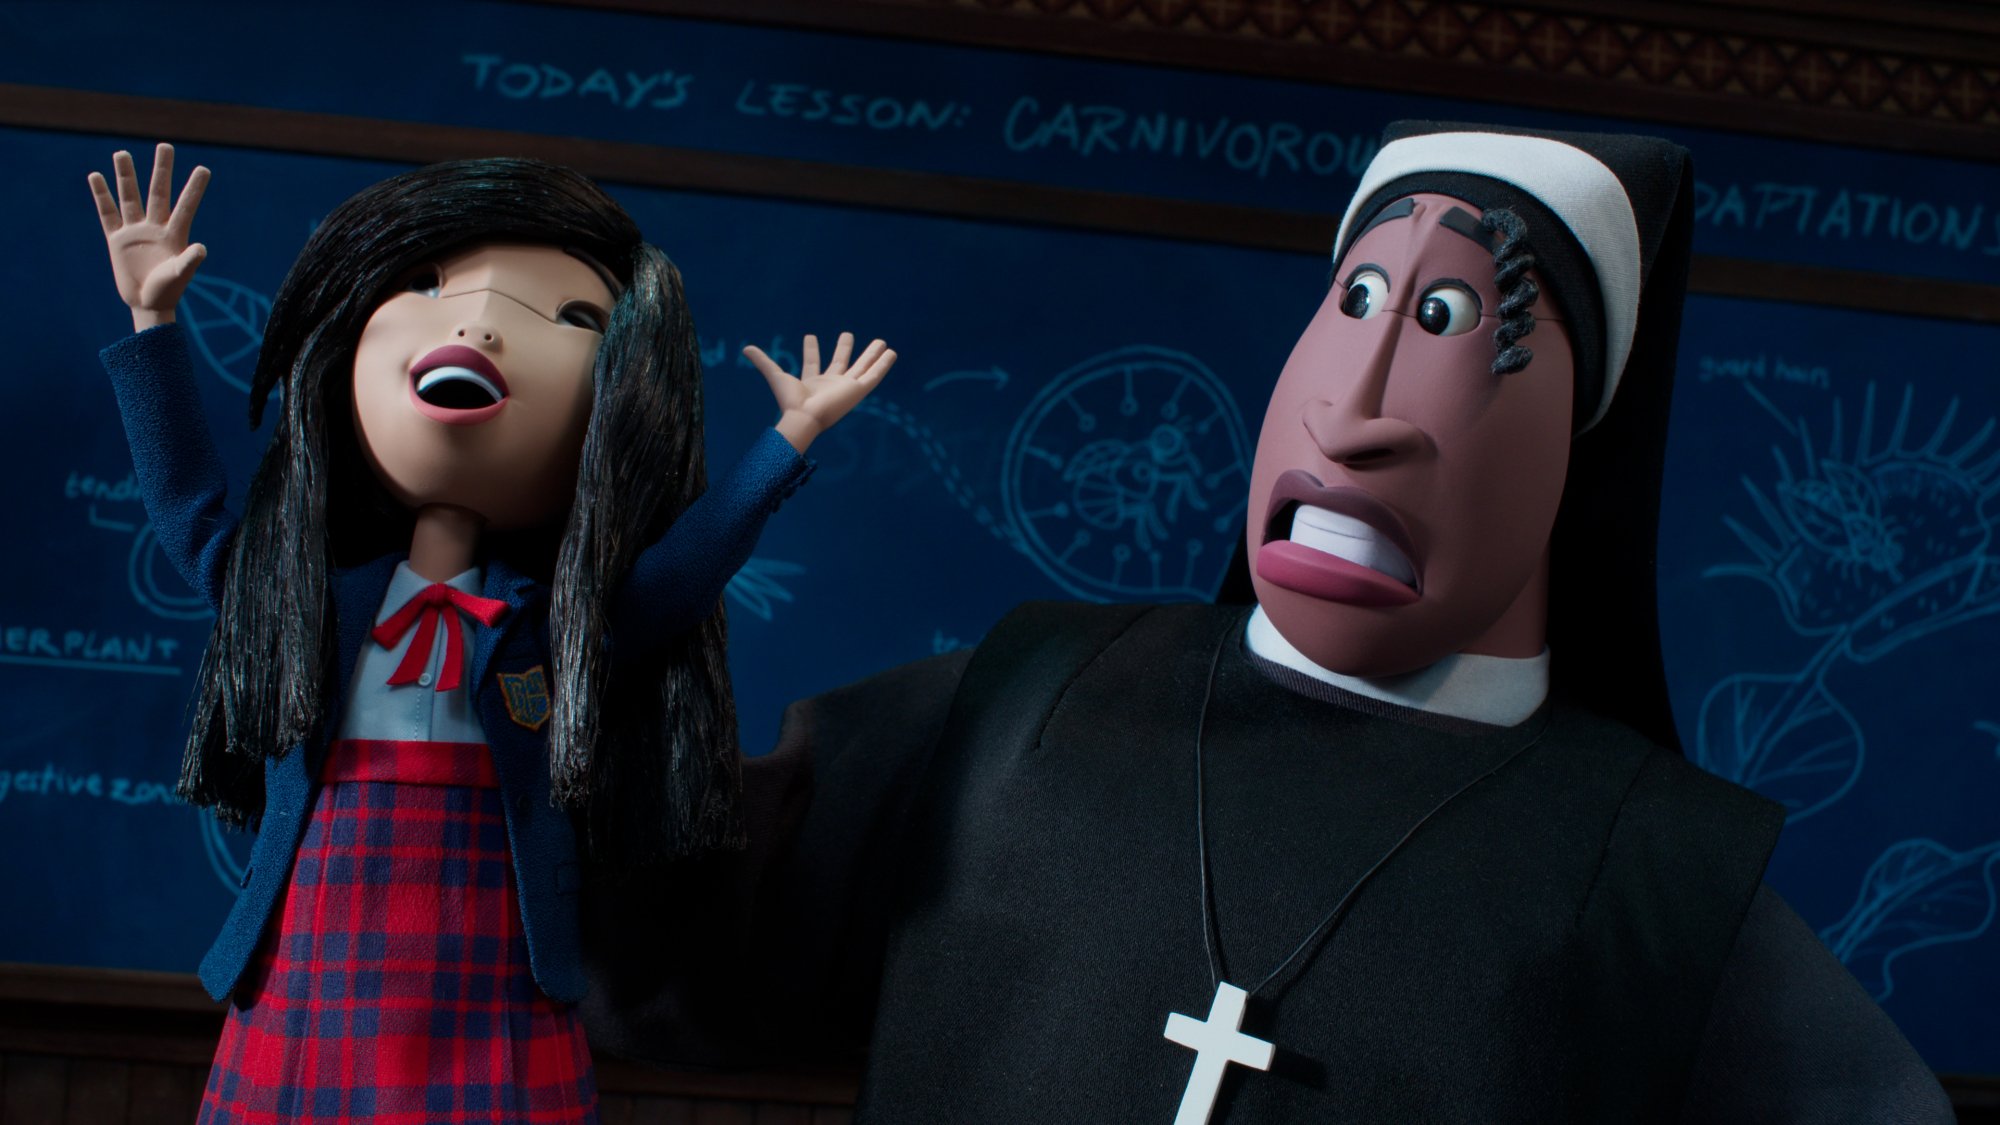 A young girl in a school uniform screams in delight while a nun looks on in horror.